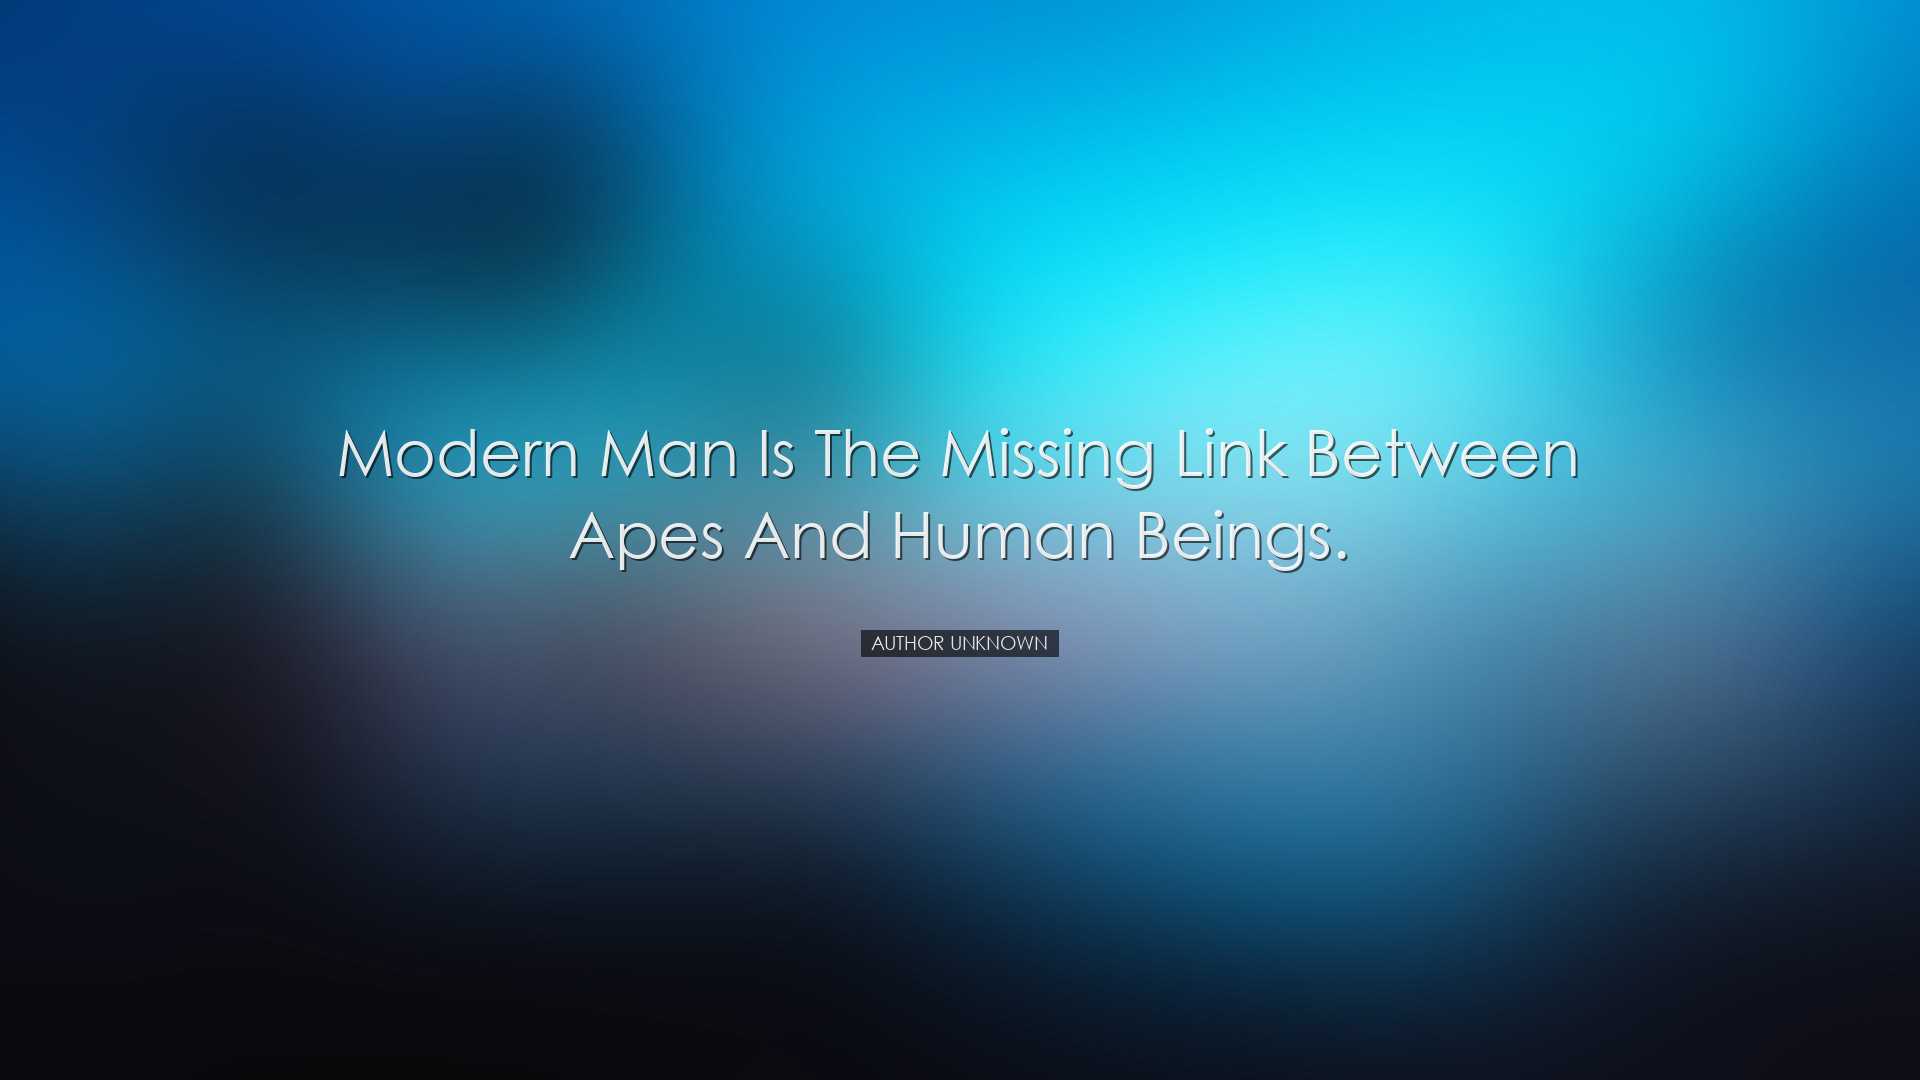 Modern man is the missing link between apes and human beings. - Au